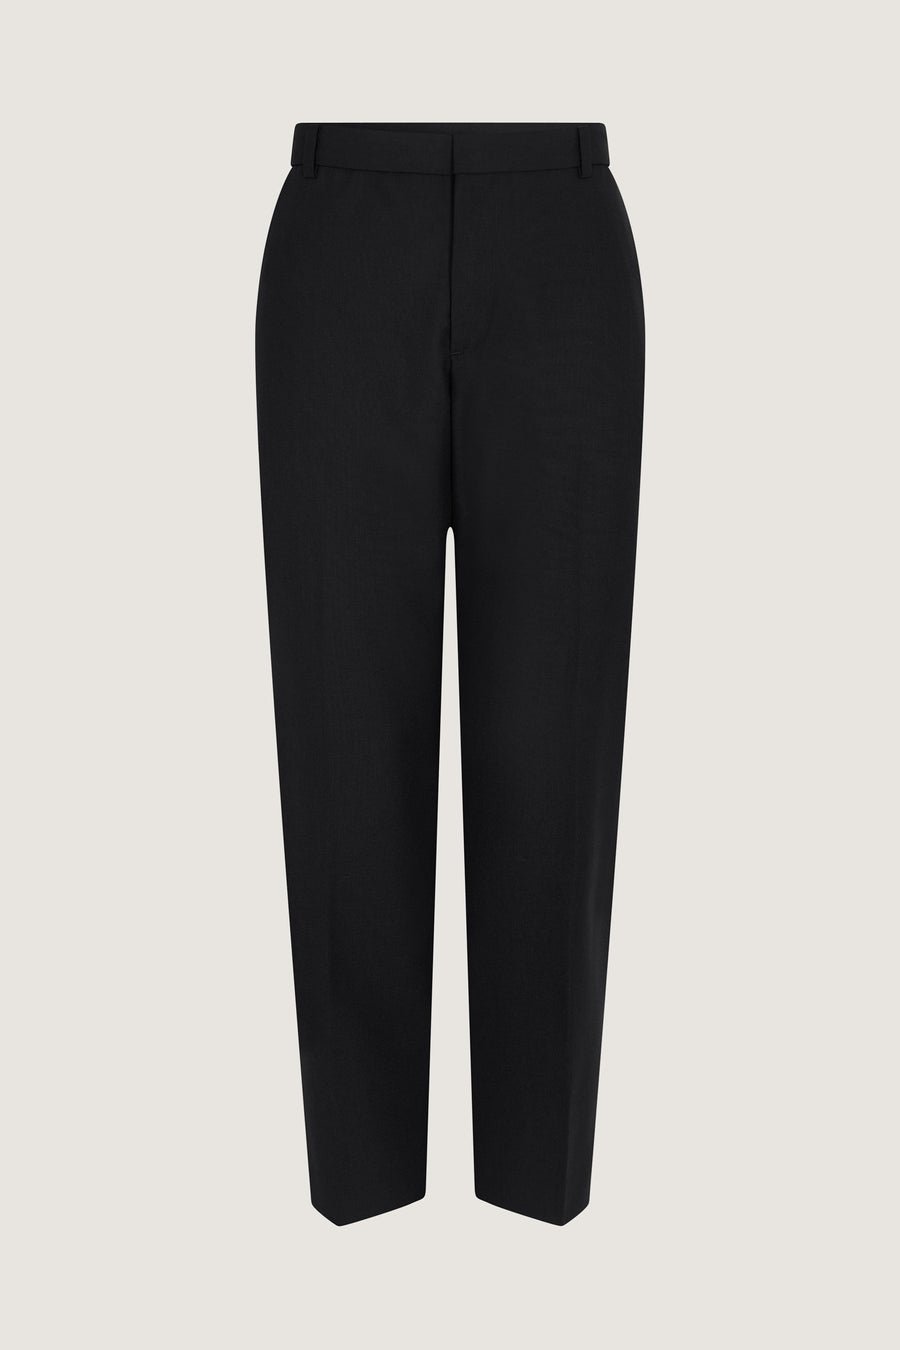 ADELE TROUSERS